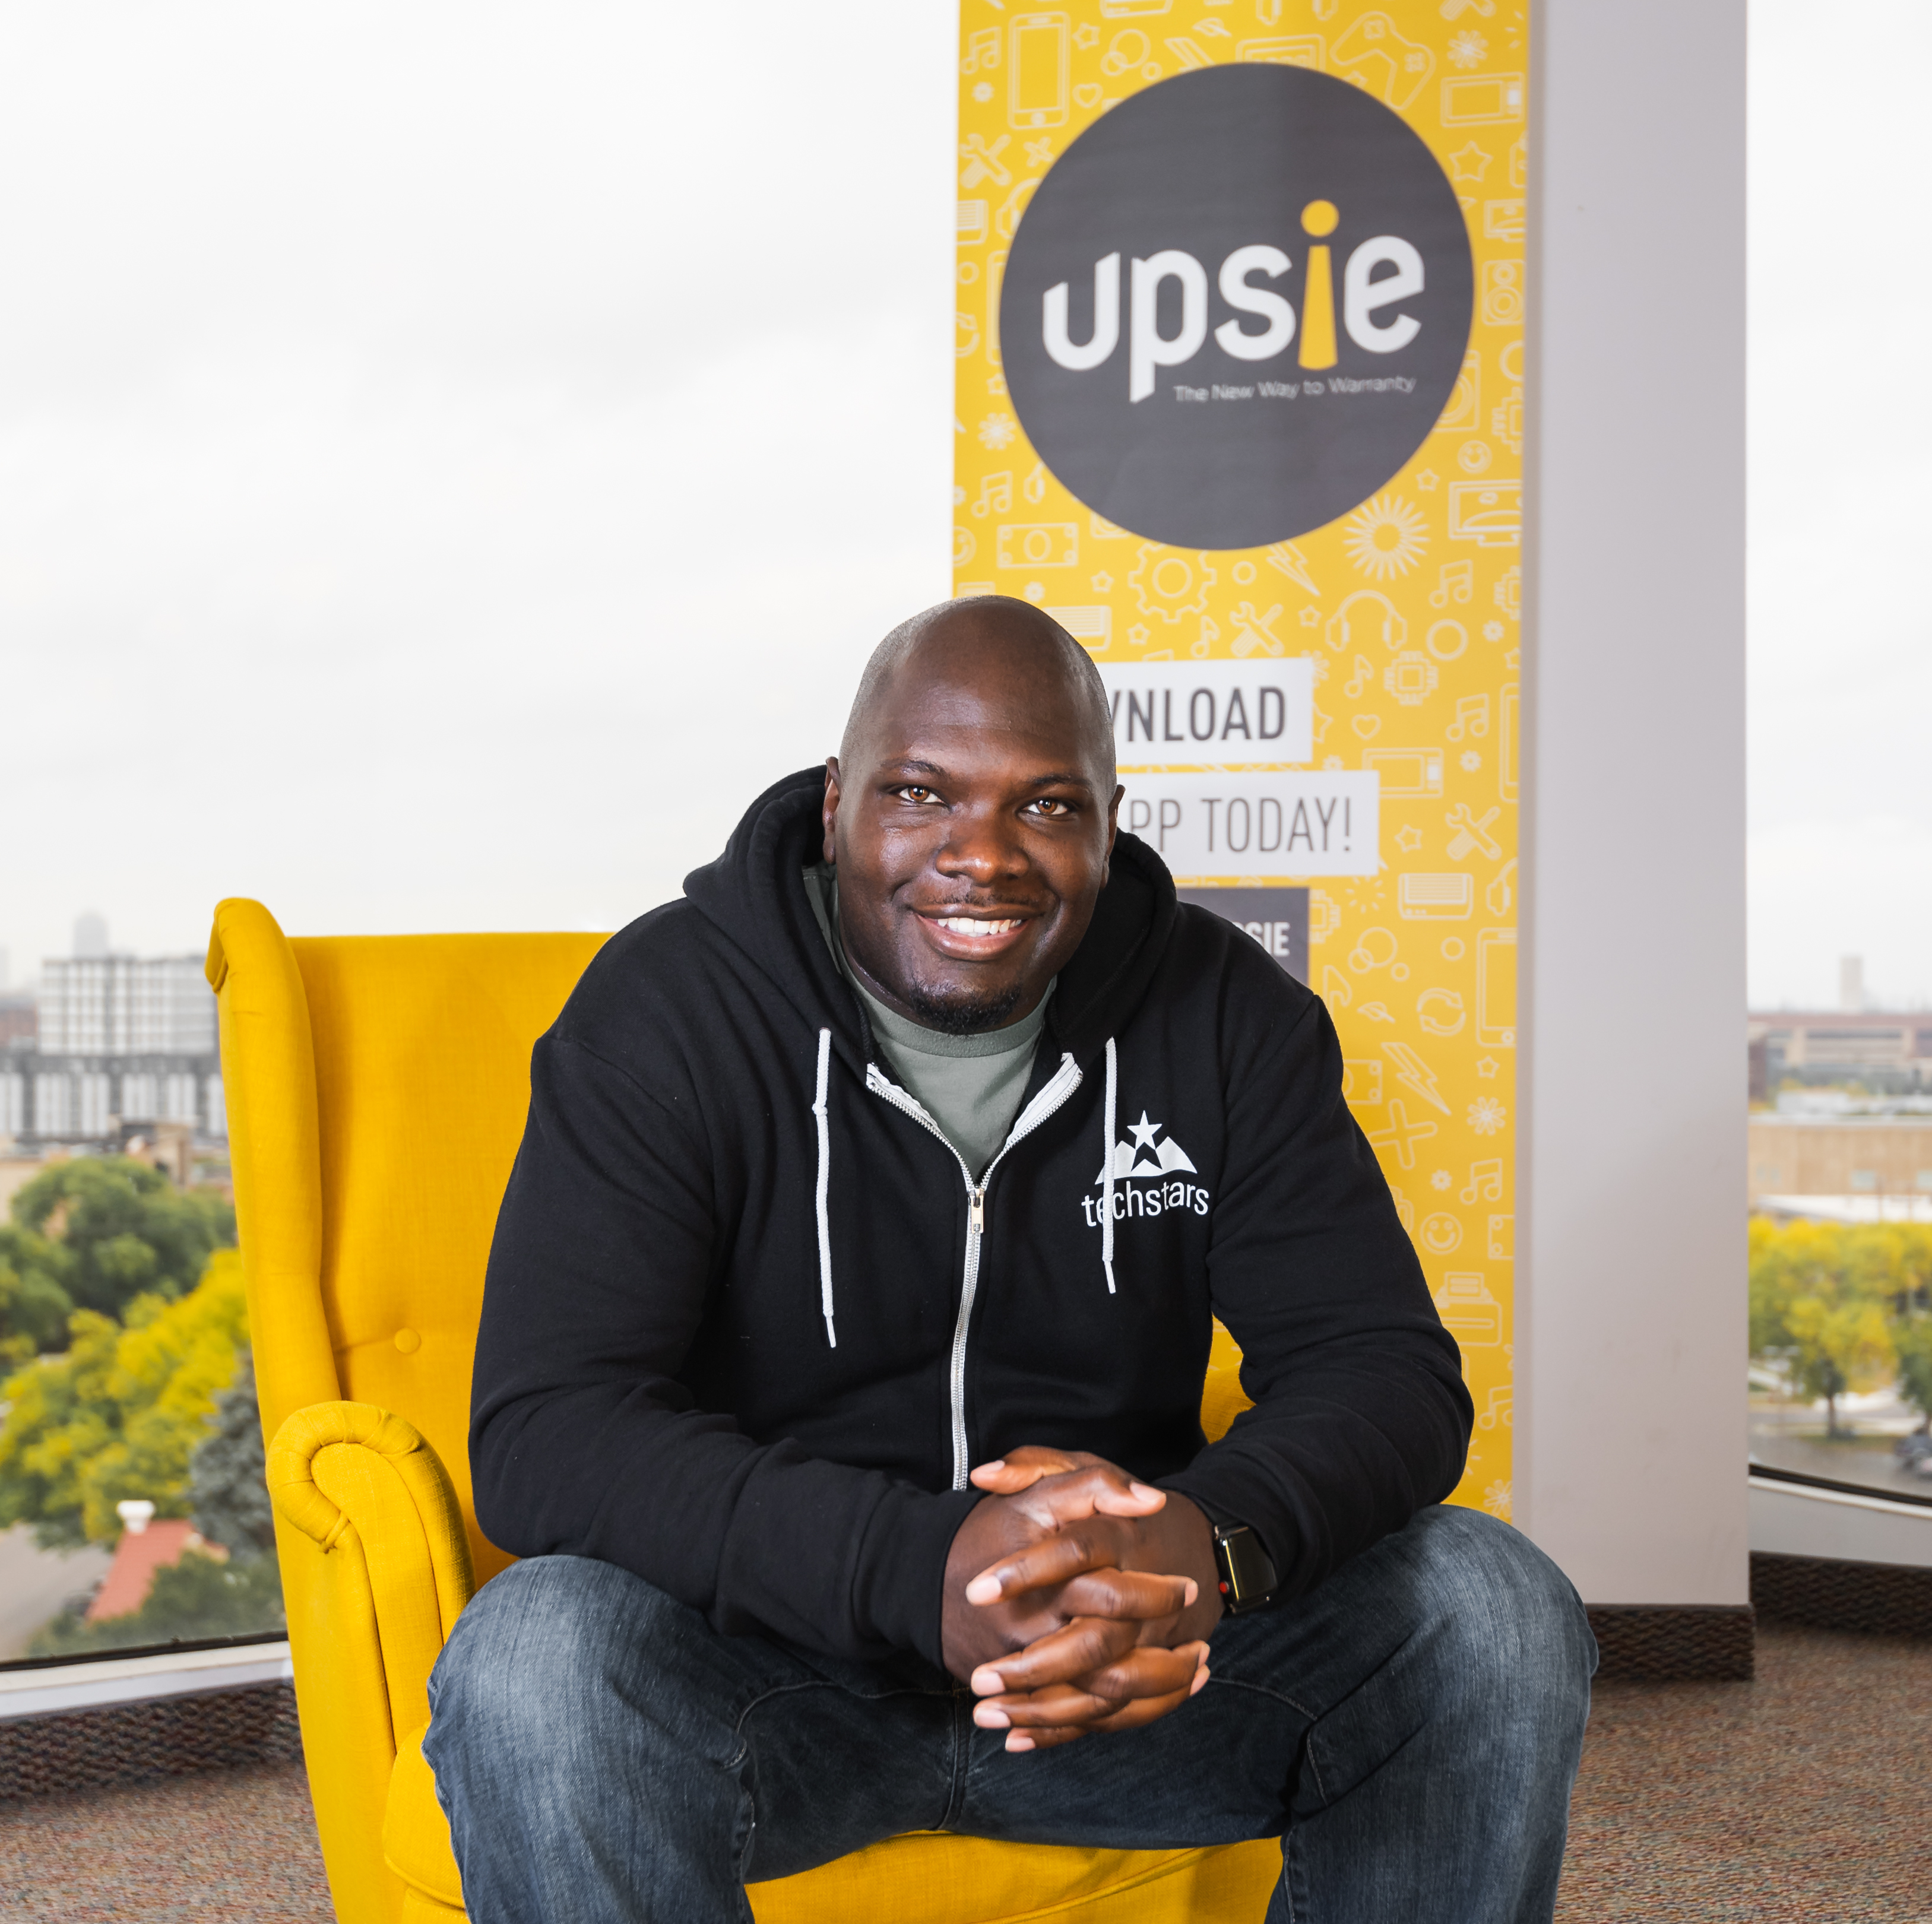 Upsie, A Minnesota Based Company Making Warrantees Easier and More Affordable, Grabs $5 Million in Funding